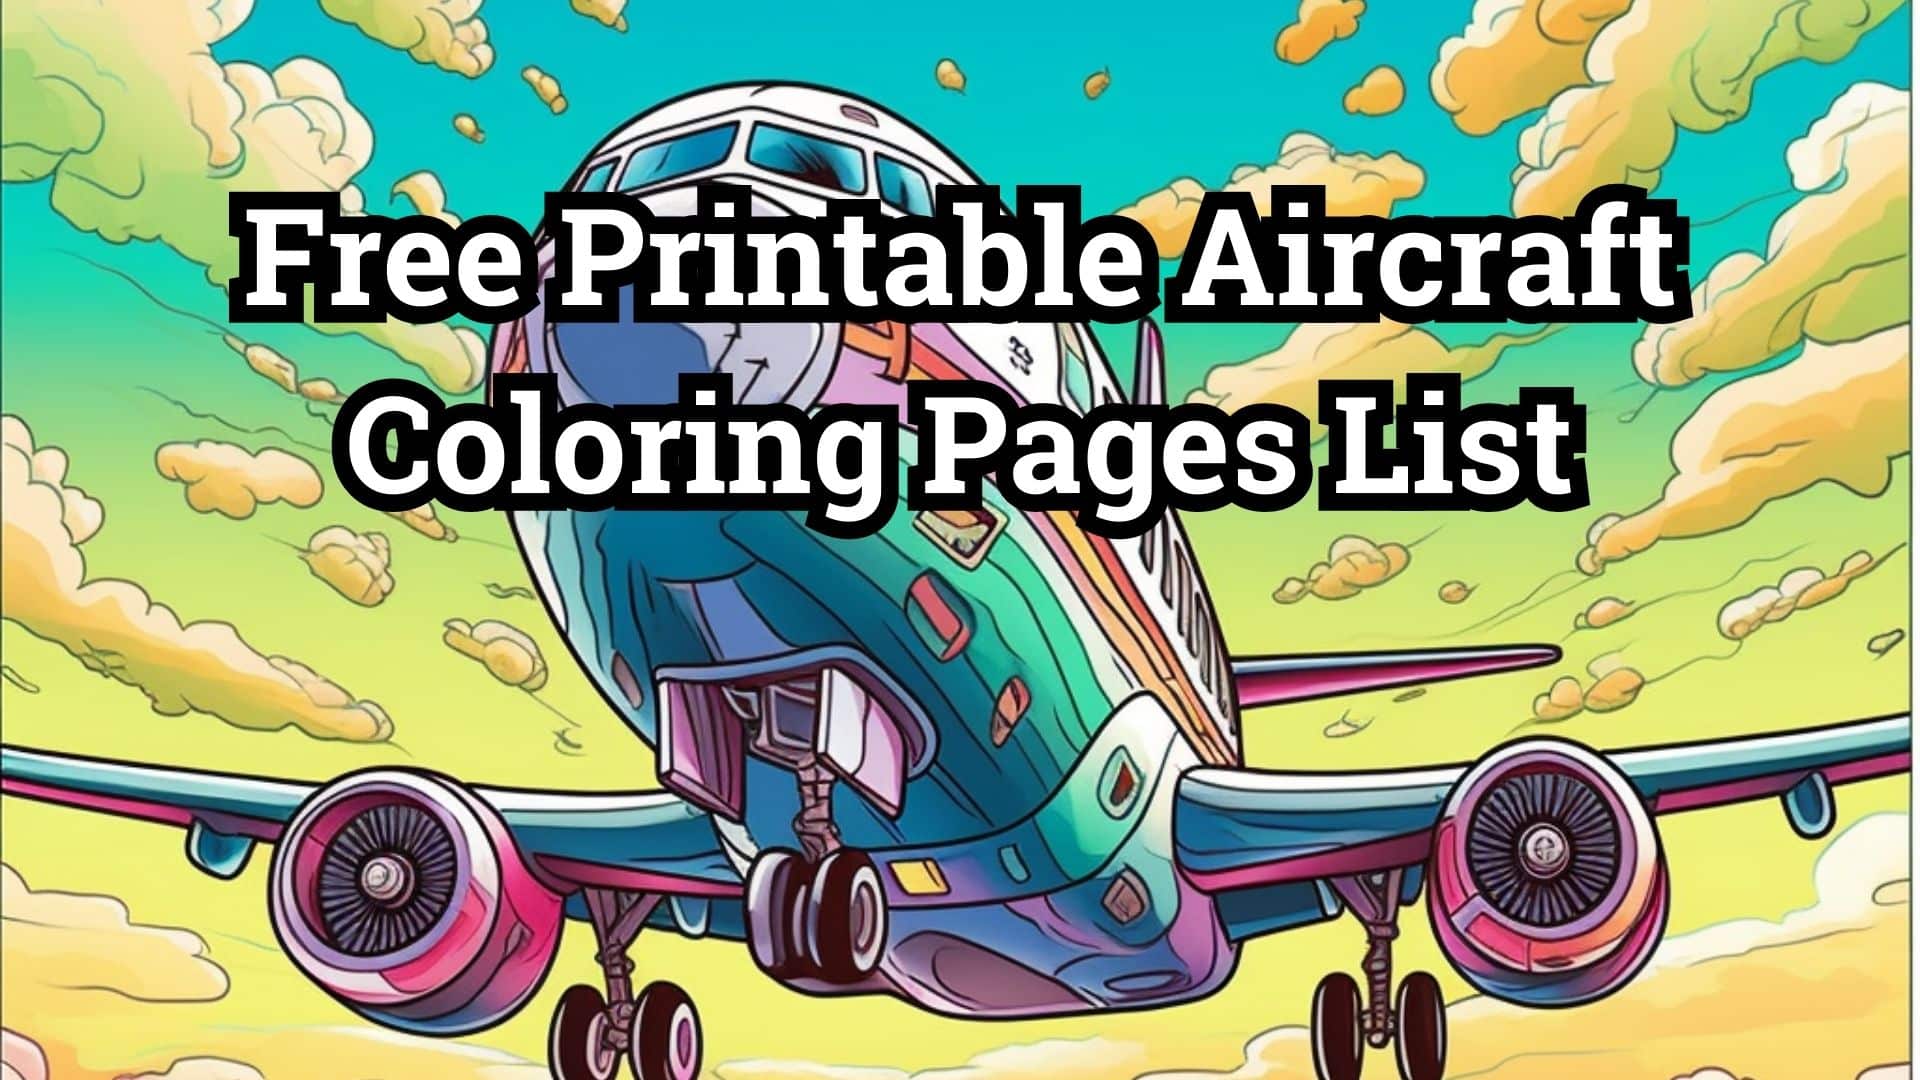 Free Printable Aircraft Coloring Pages List